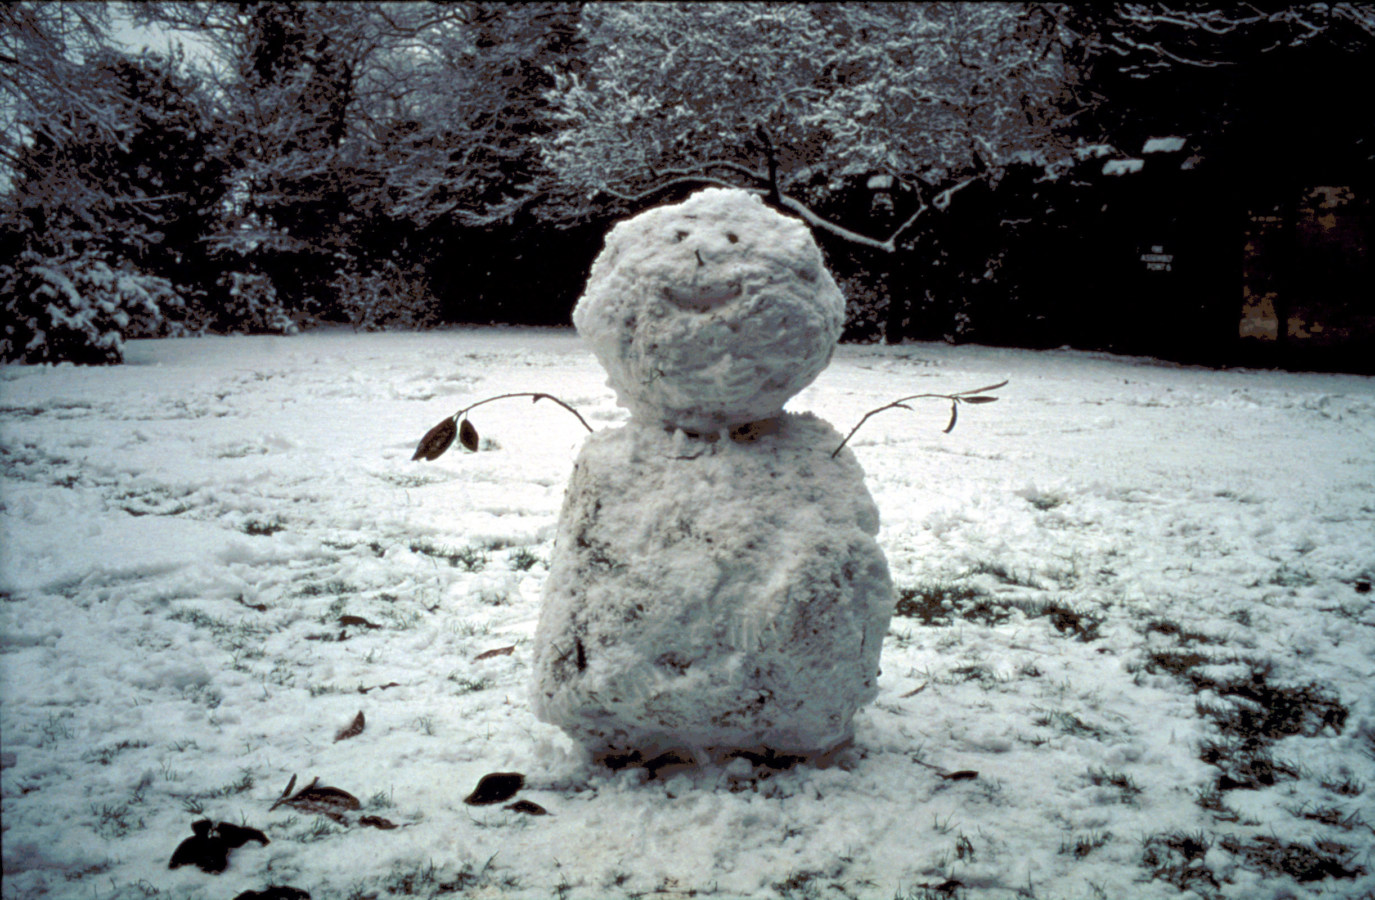 Color photograph of a snowman with branches for hands in a snowy field